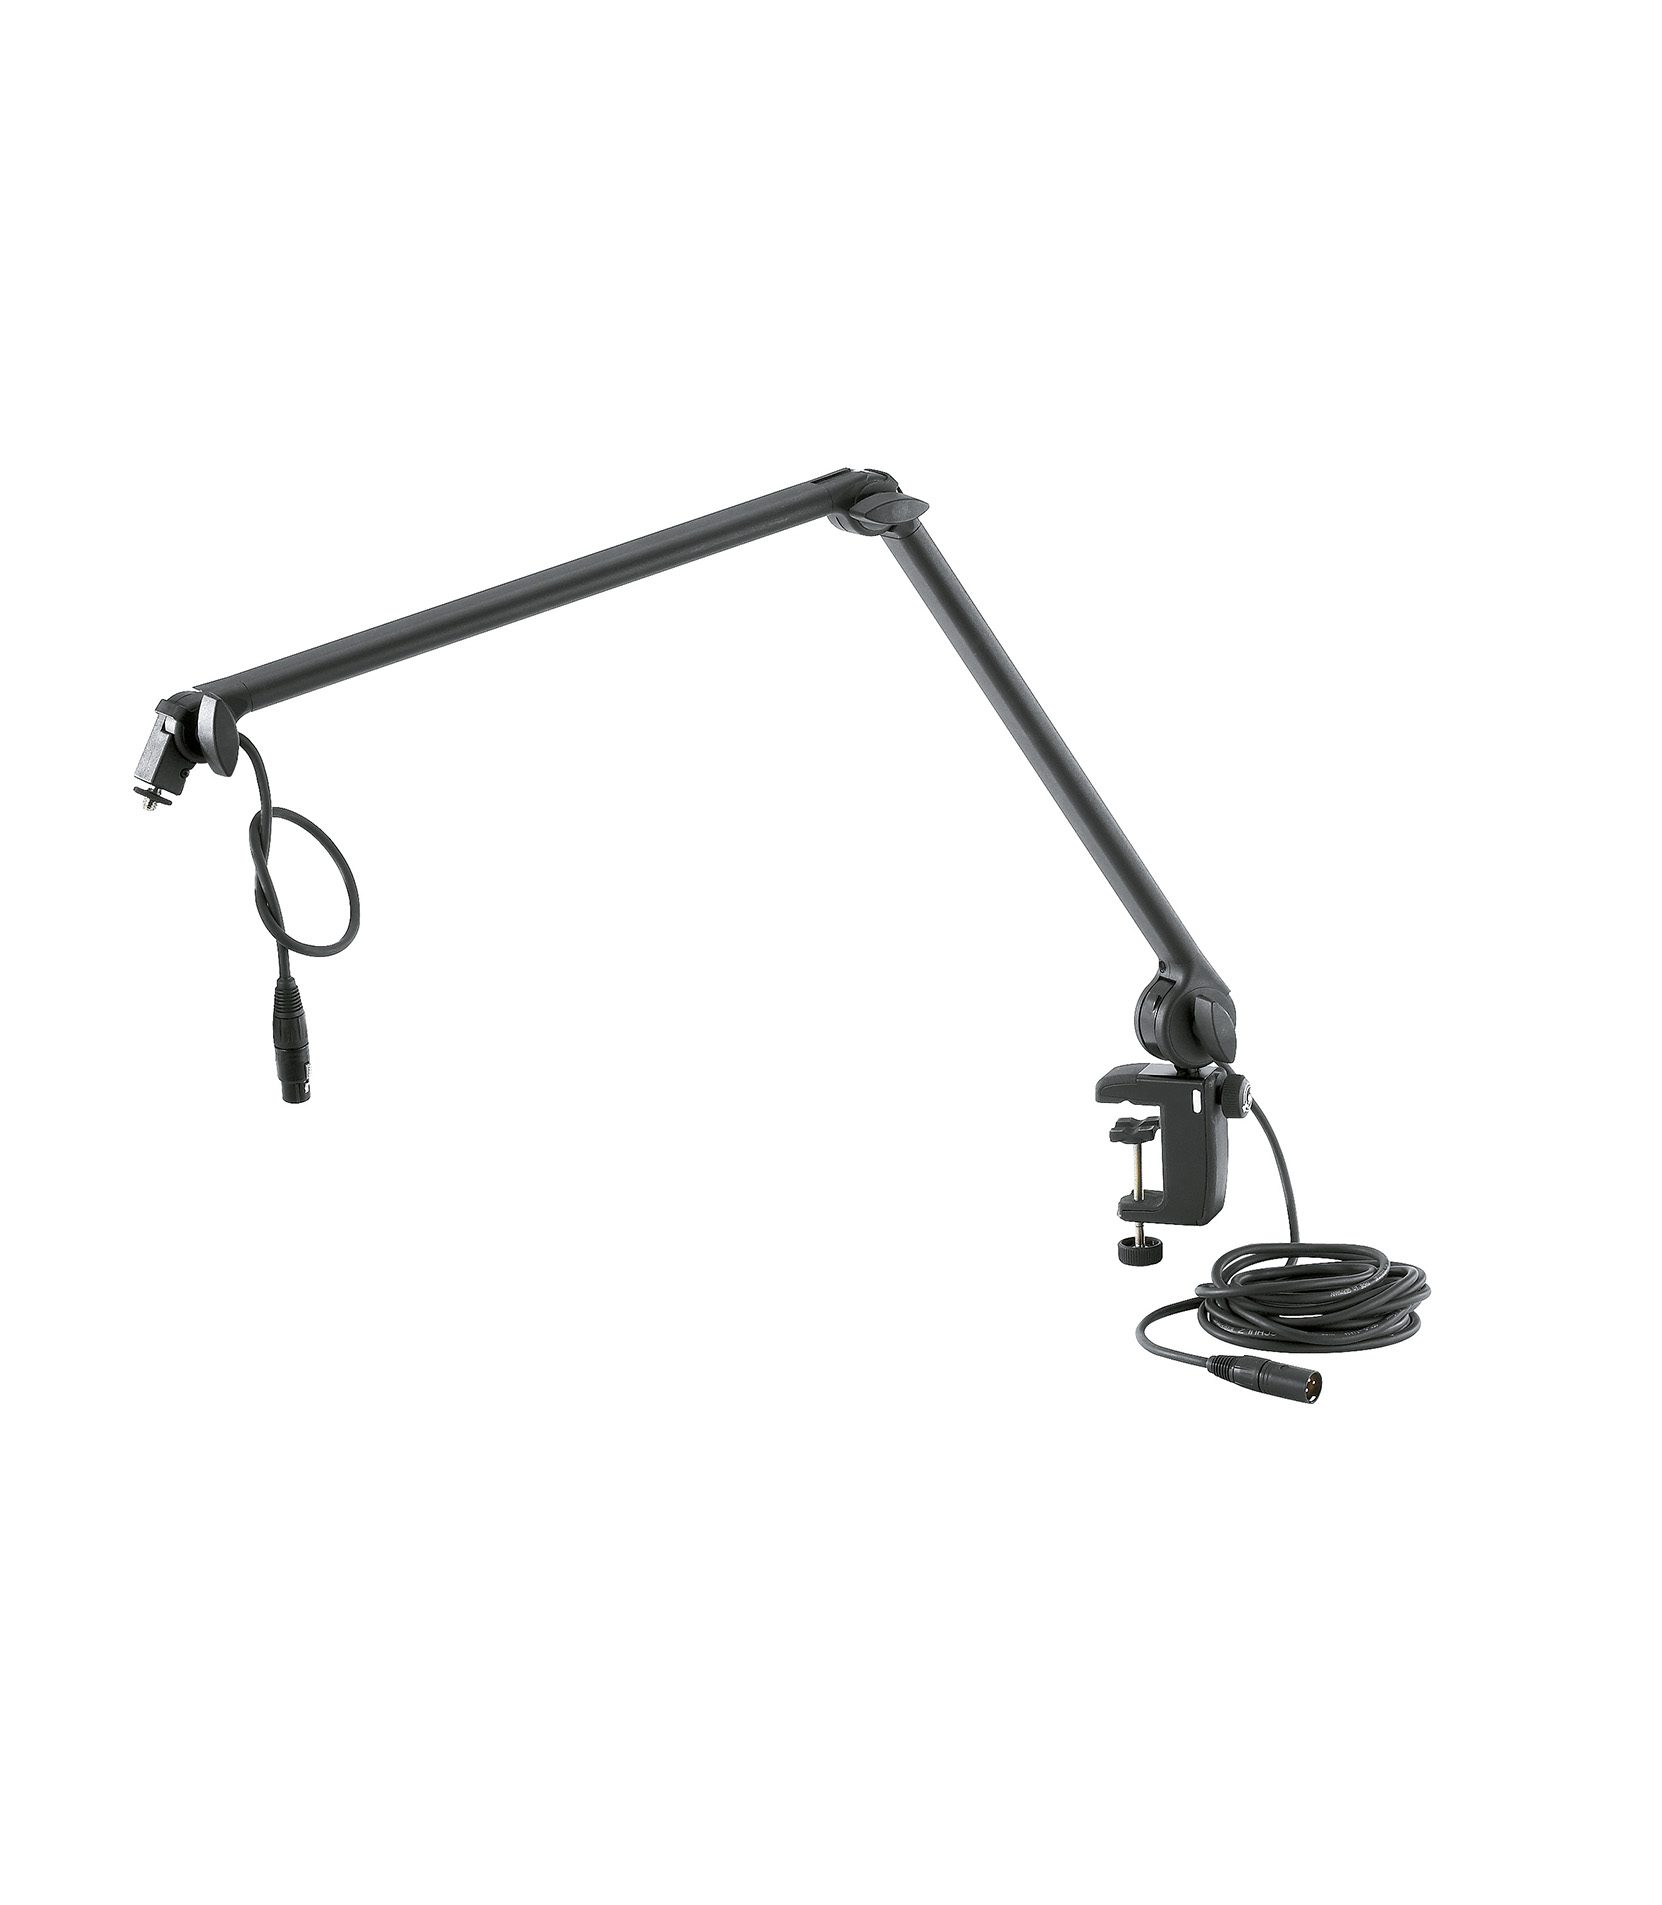 This exclusive microphone arm with a 3/8" or 5/8" thread connector in a modern design with a new innovative table clamp for quick and easy positioning of a microphone in the studio or at a multimedia work station.